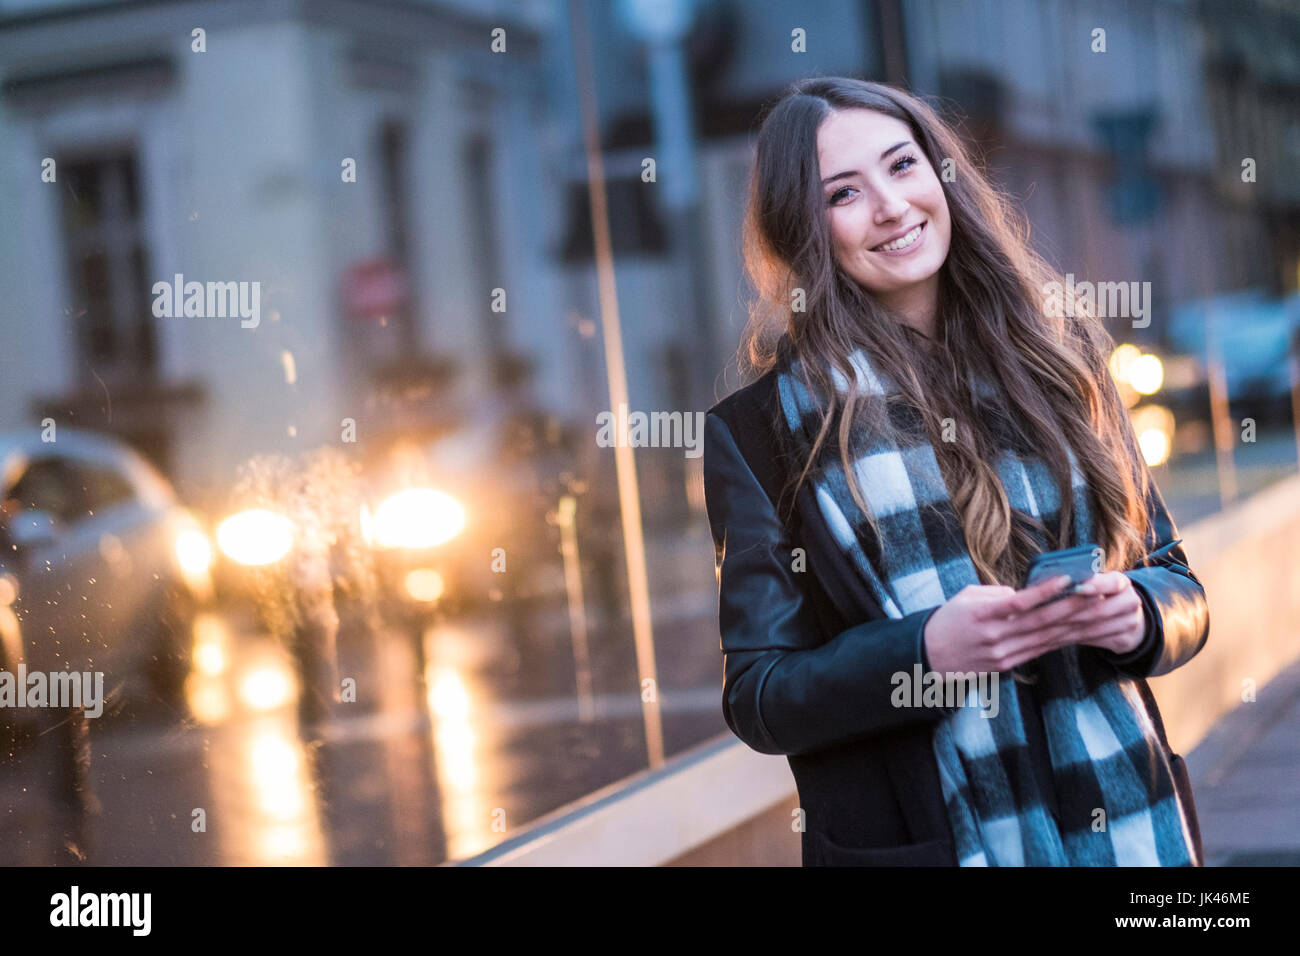 Smiling Caucasian woman texting on cell phone outdoors Stock Photo